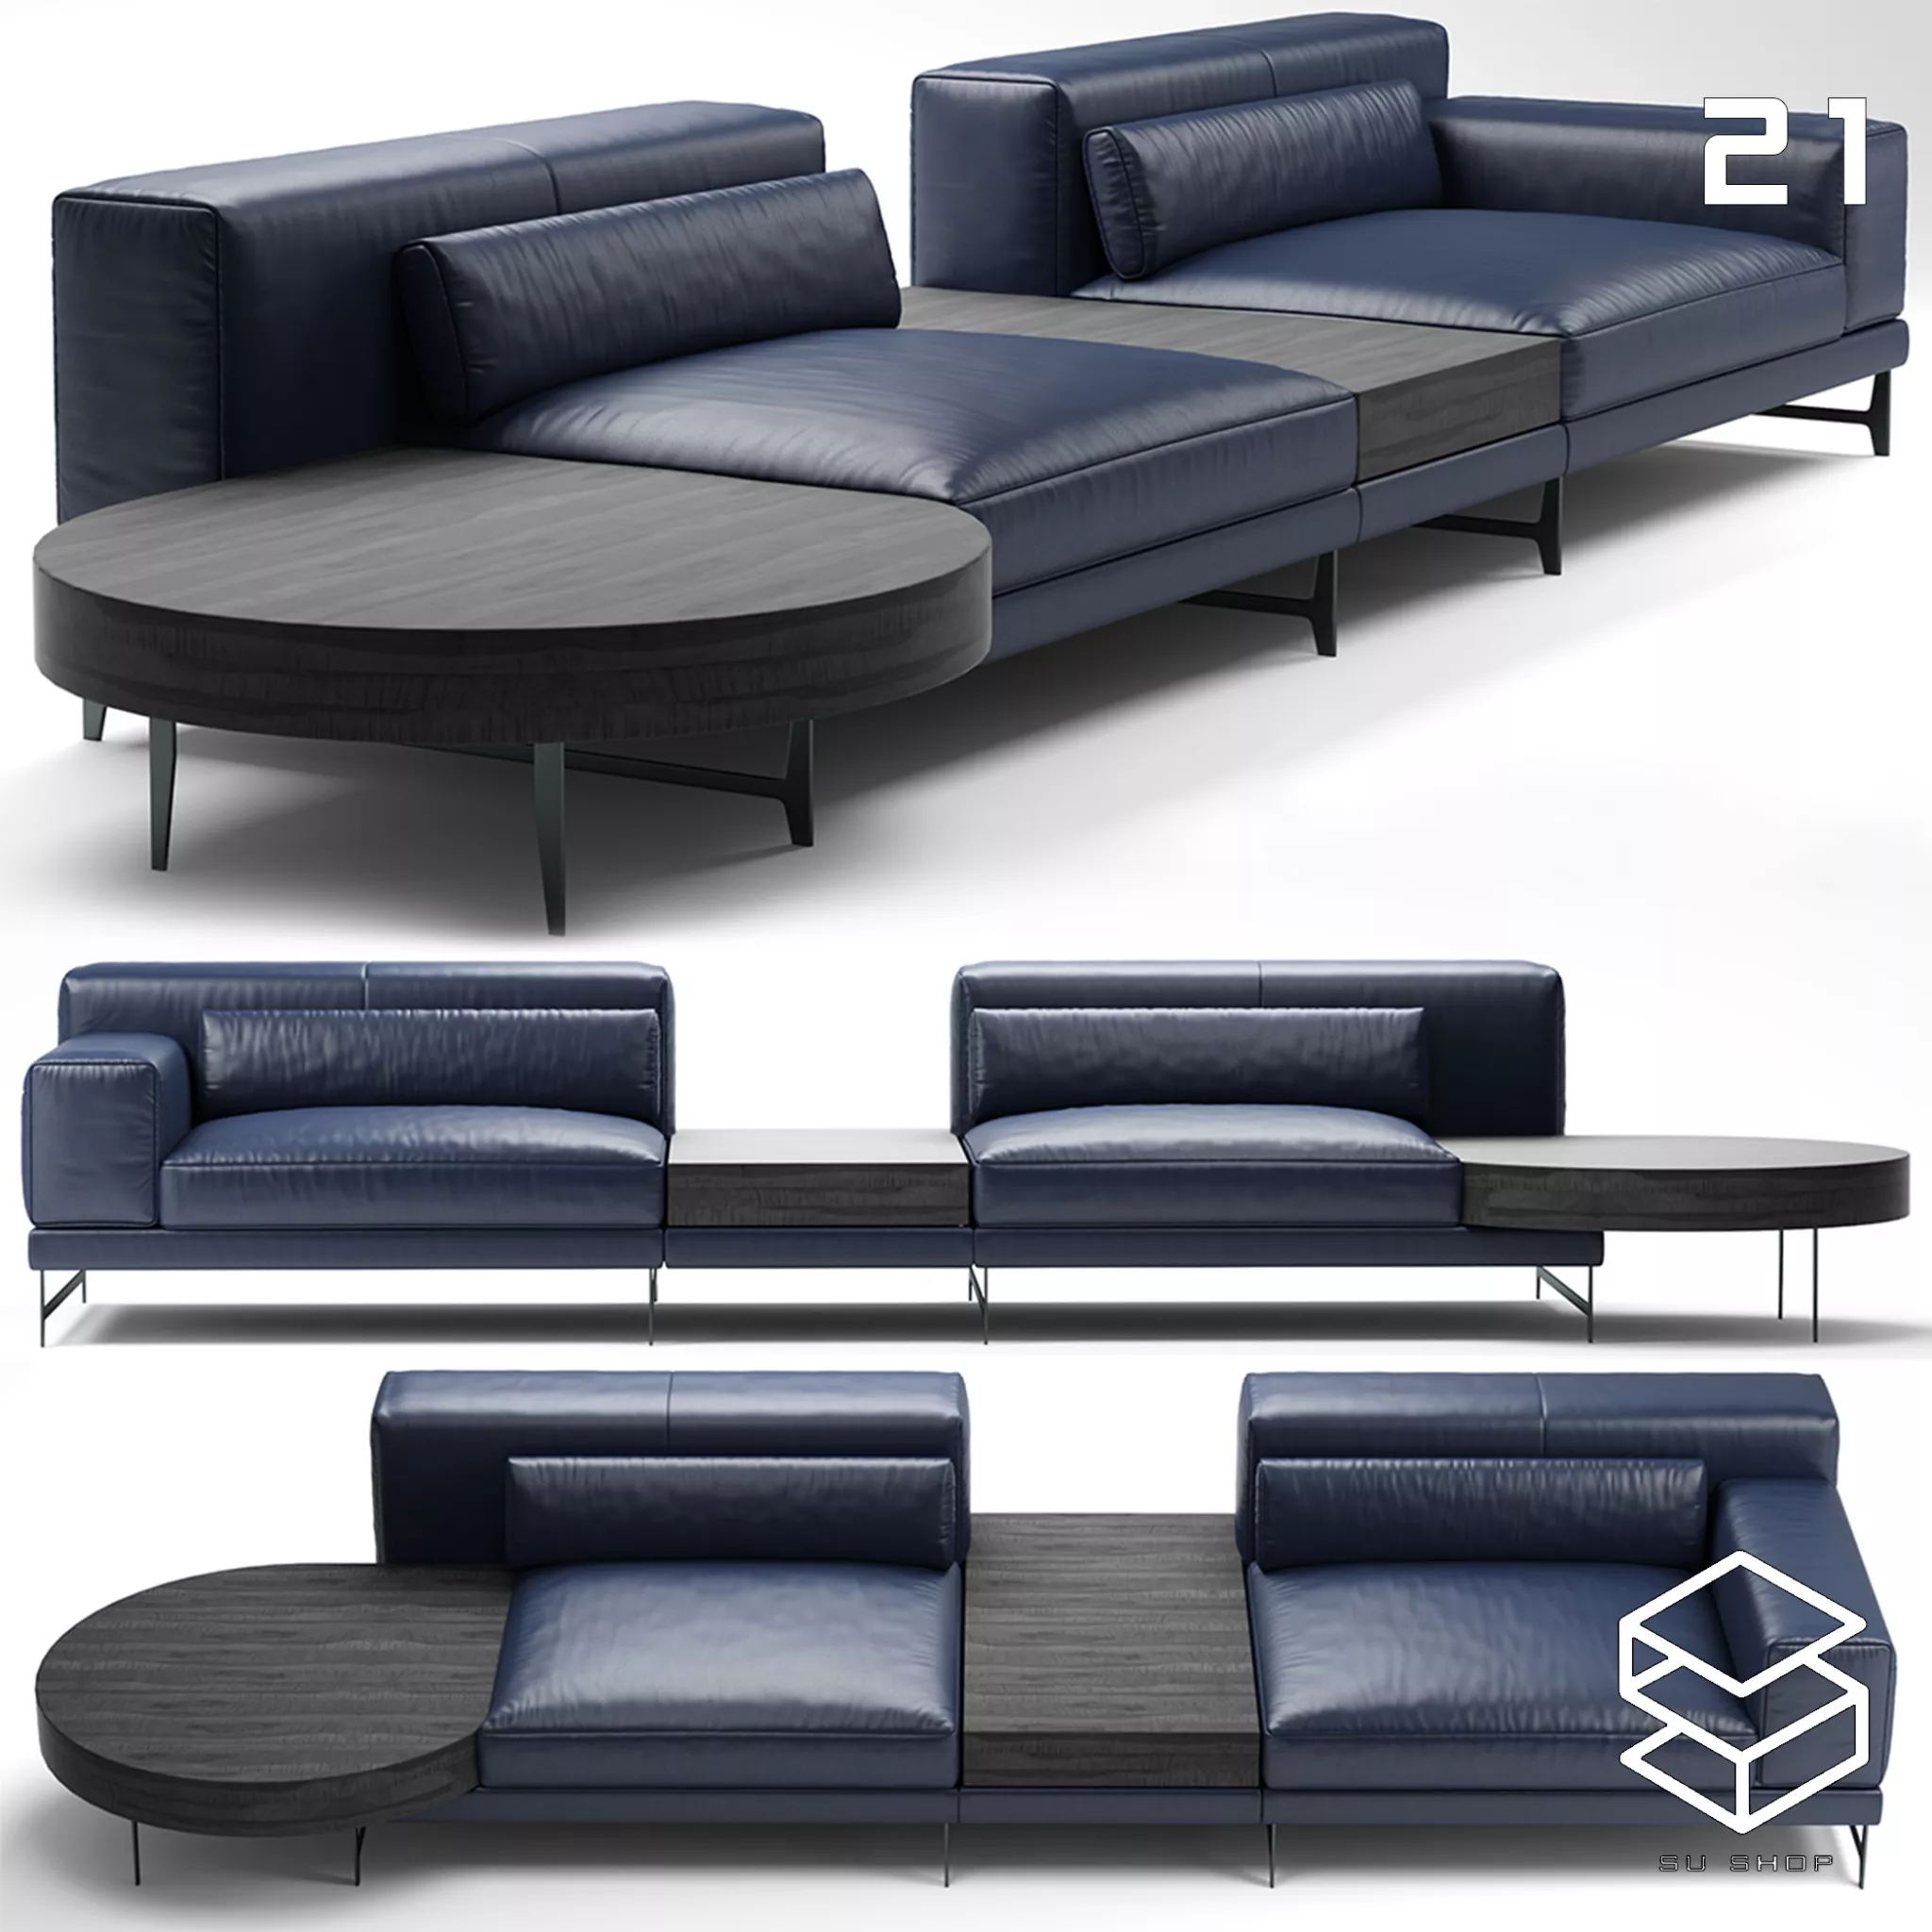 MODERN SOFA - SKETCHUP 3D MODEL - VRAY OR ENSCAPE - ID13508